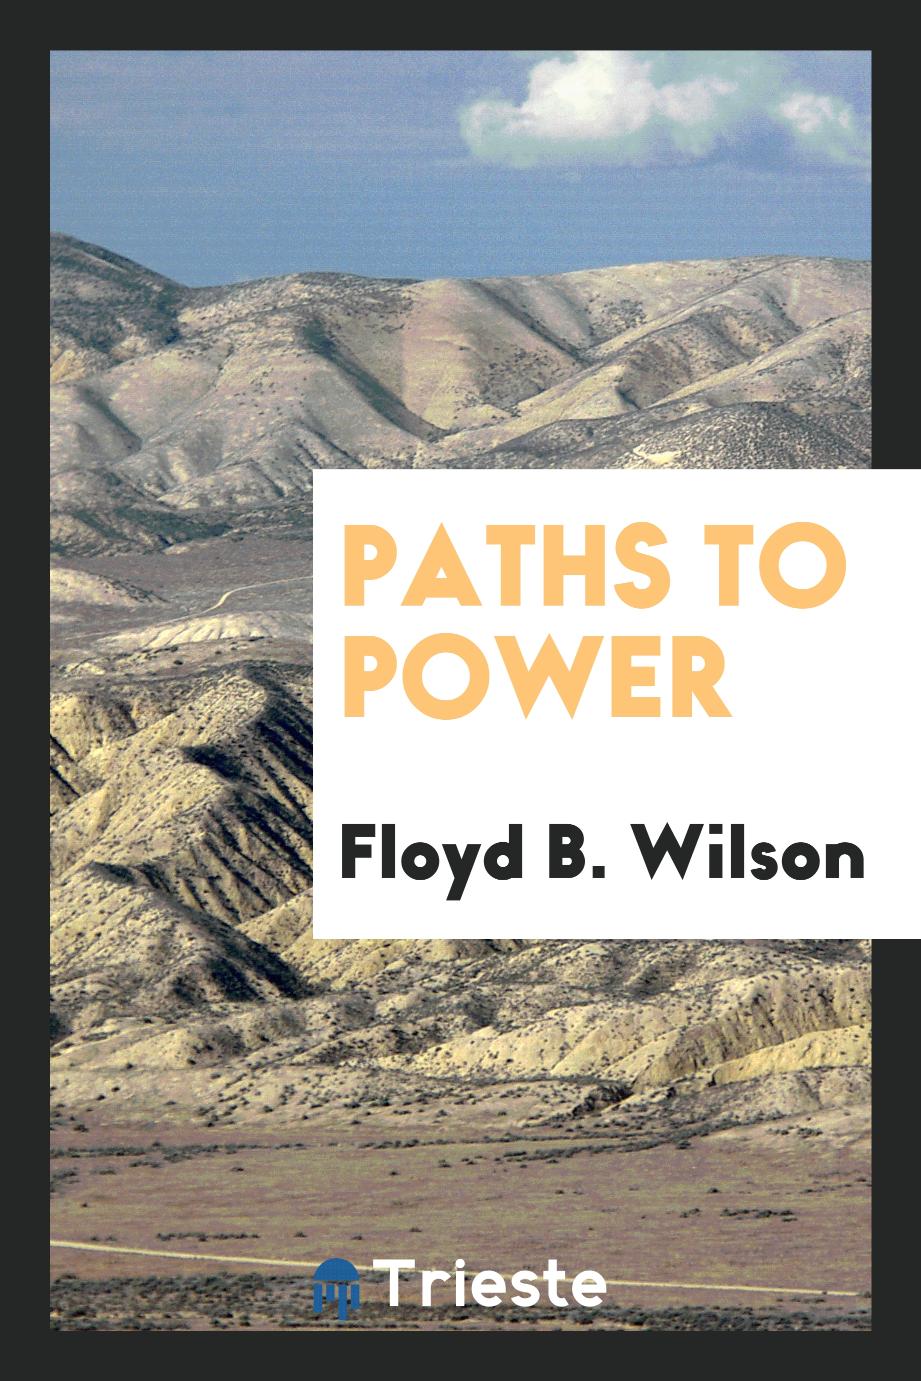 Paths to power